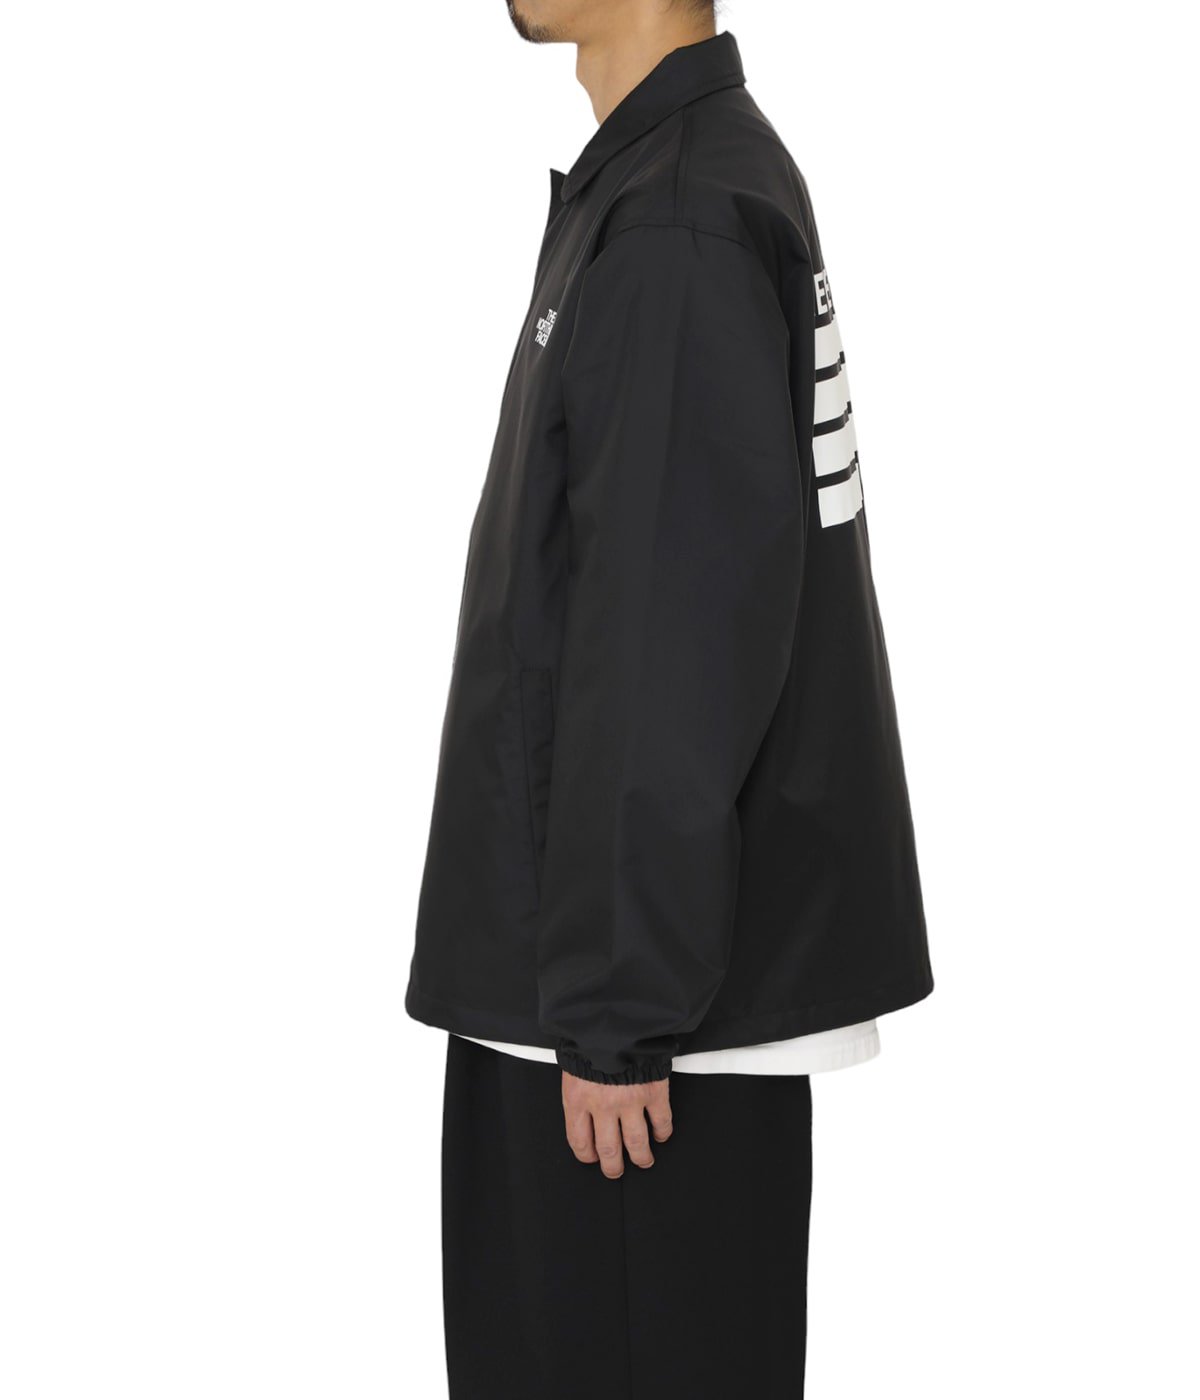 NEVER STOP ING The Coach Jacket | THE NORTH FACE(ザ ノース